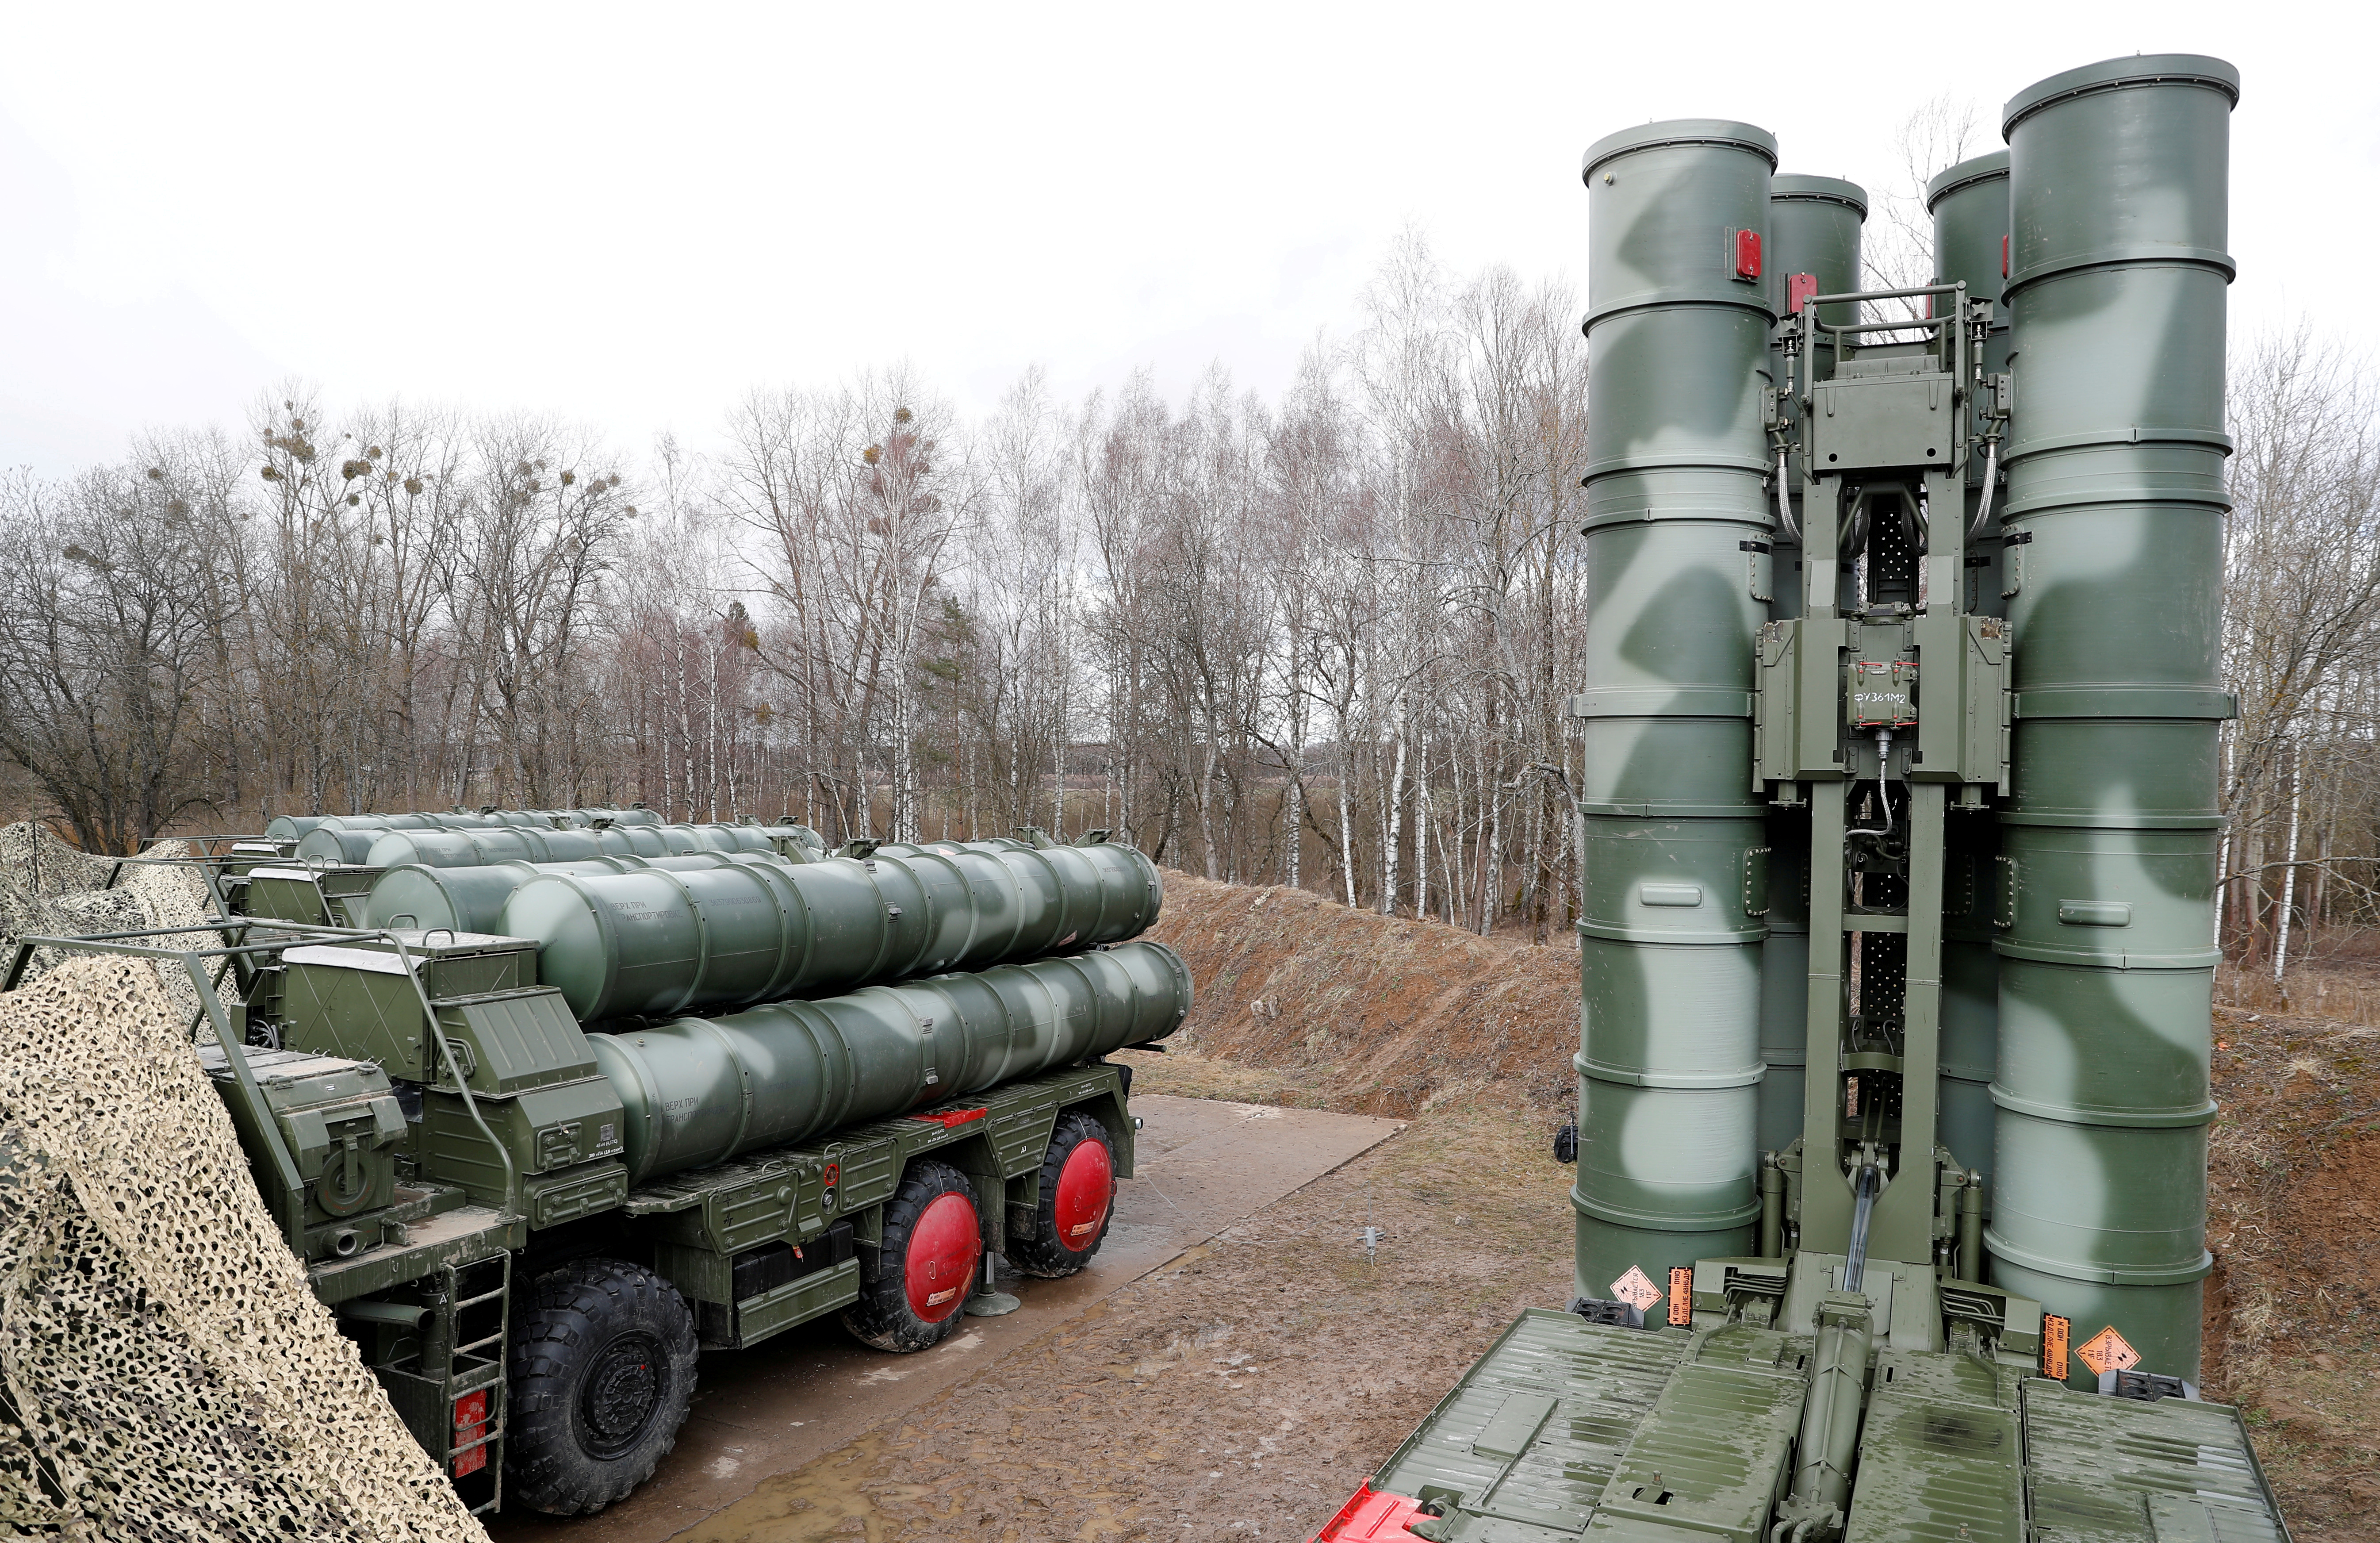 image Russia says Turkey could sign new S-400 missile contract soon